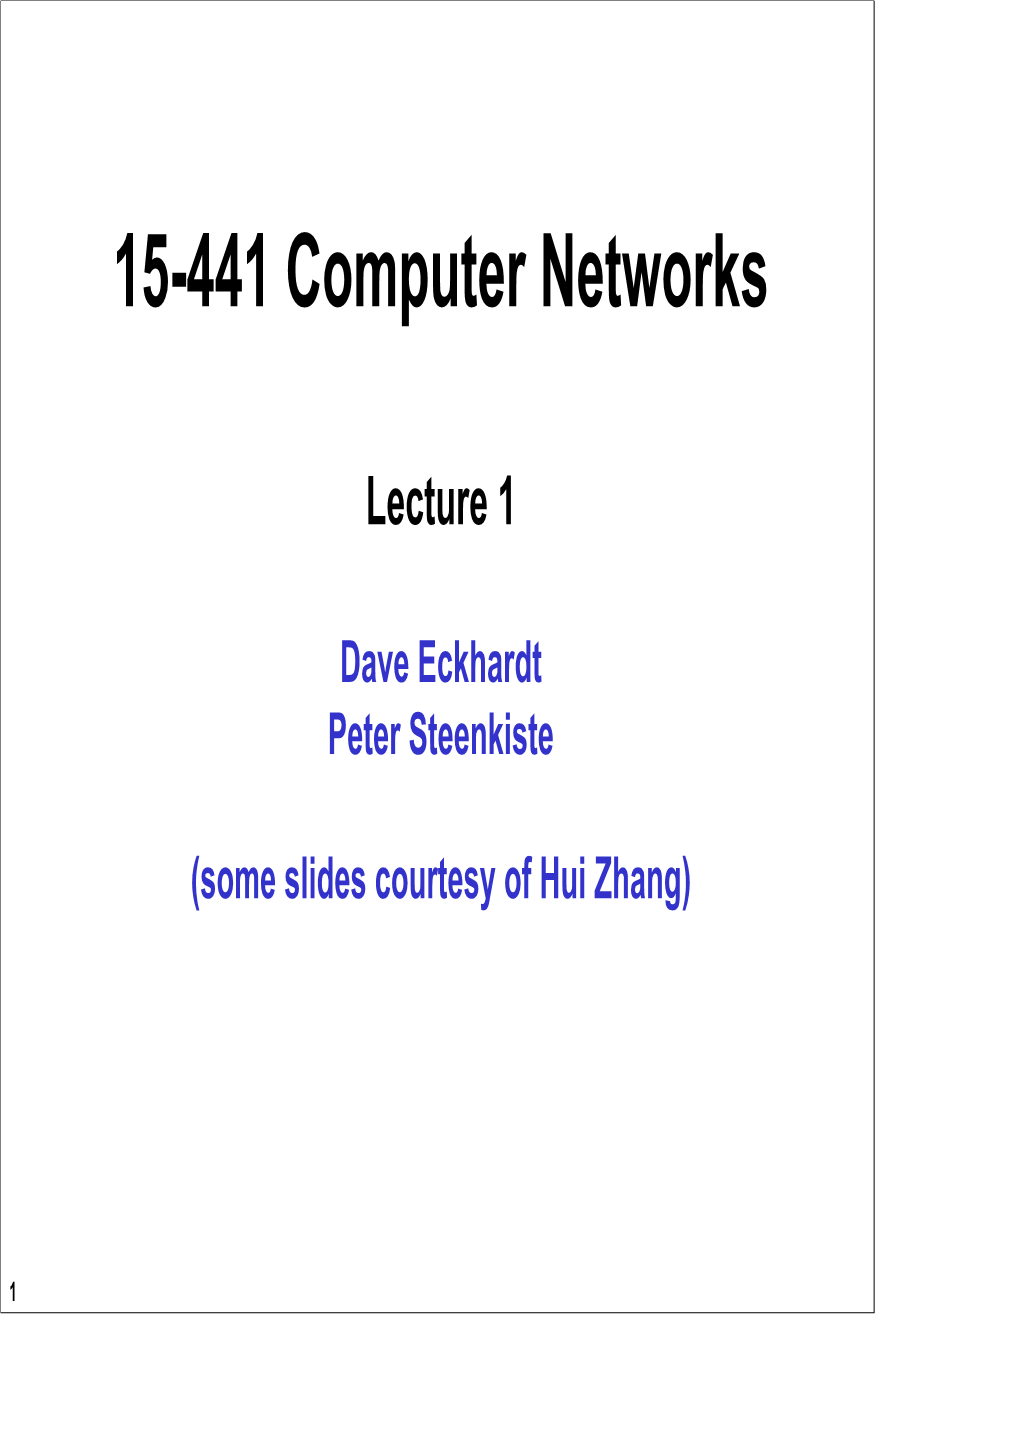 15-441 Computer Networks